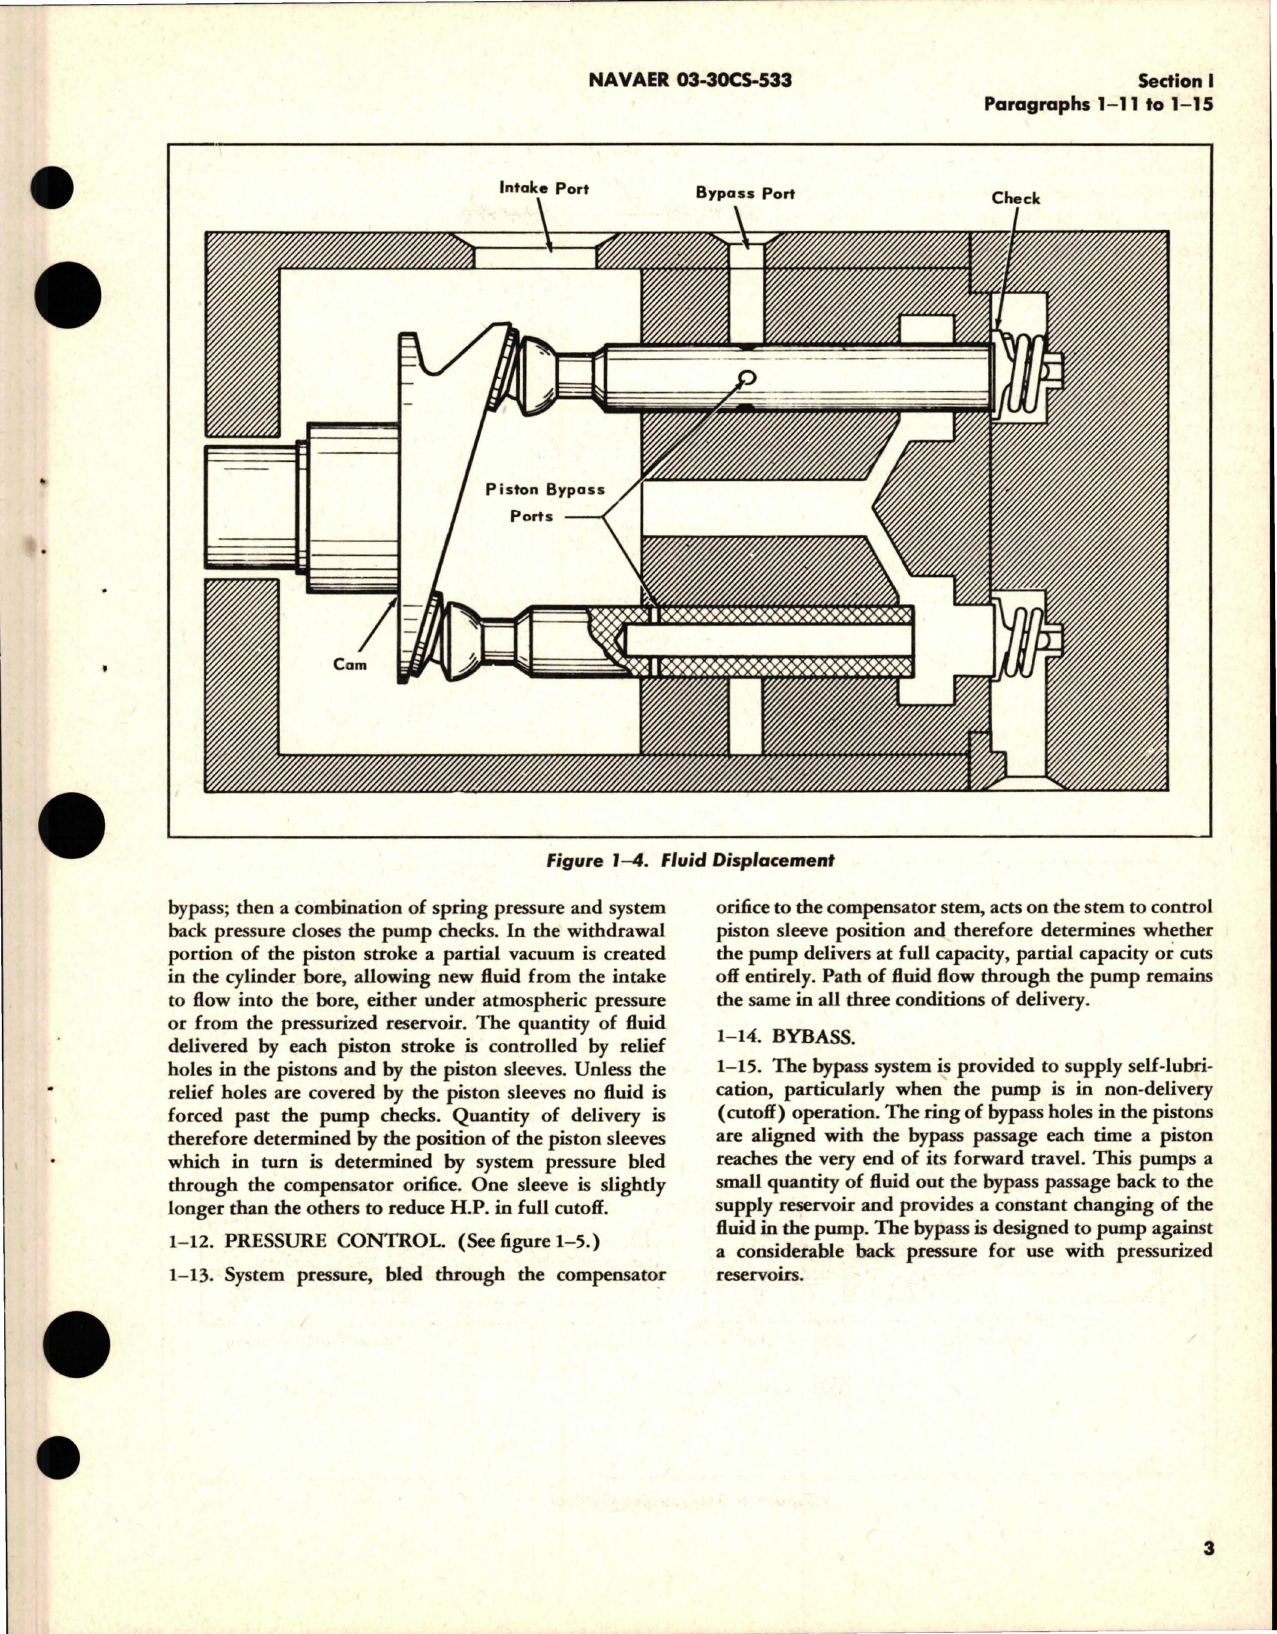 Sample page 7 from AirCorps Library document: Overhaul Instructions for Stratopower Hydraulic Pumps - Models 65WB06006, 65WB06006-1, 65WB06006-2 